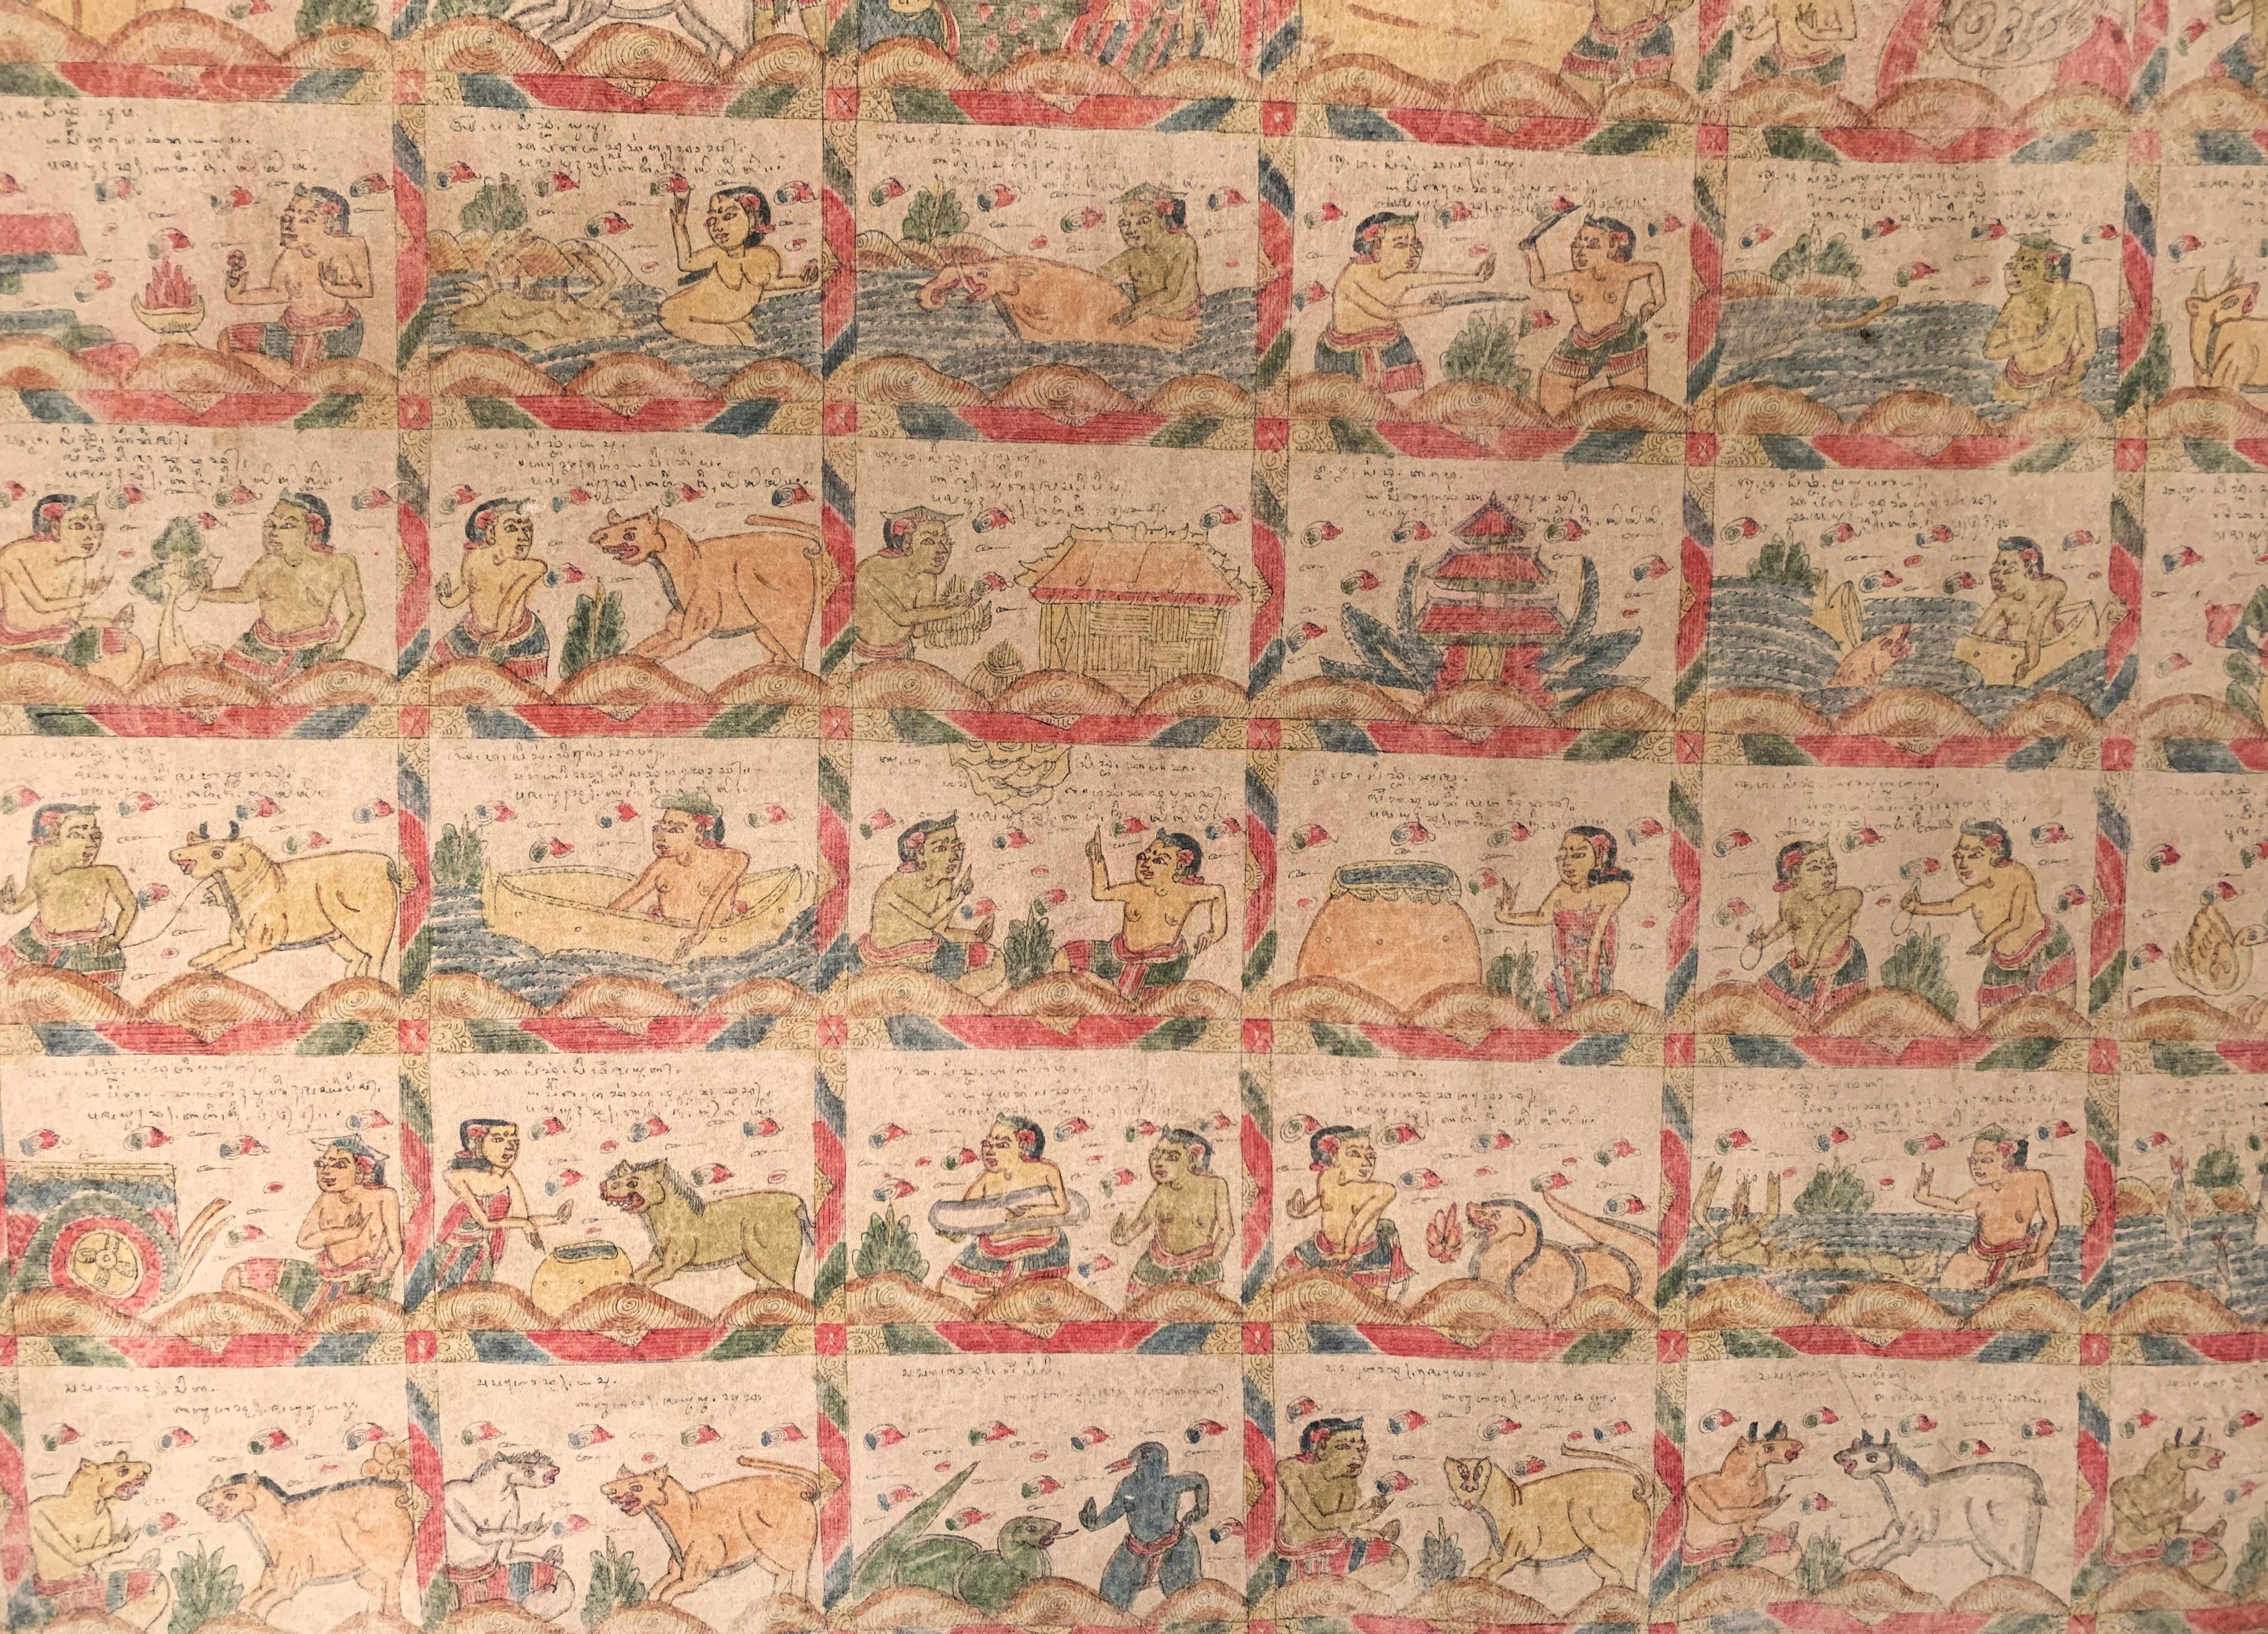 An early 20th century 'Kamasan' cotton textile painting from Bali, Indonesia. The hand-painted image has great detail and depicts Balinese Hindu mythology. It is stretched over a canvas and frame and is ready to be wall mounted. 

Dimensions: